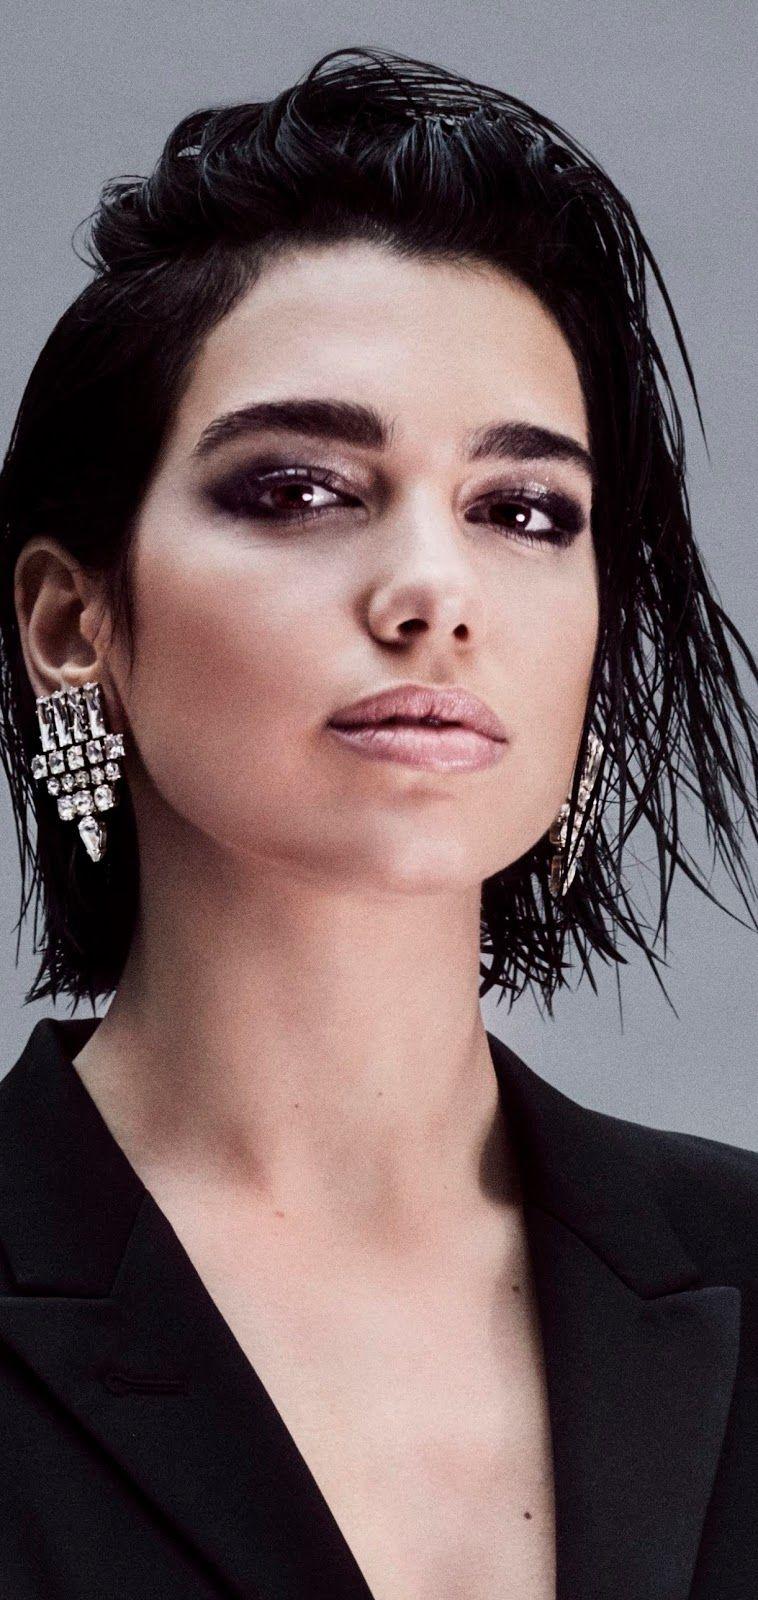 Download Dua Lipa Wallpaper for your Android, iPhone Wallpaper or